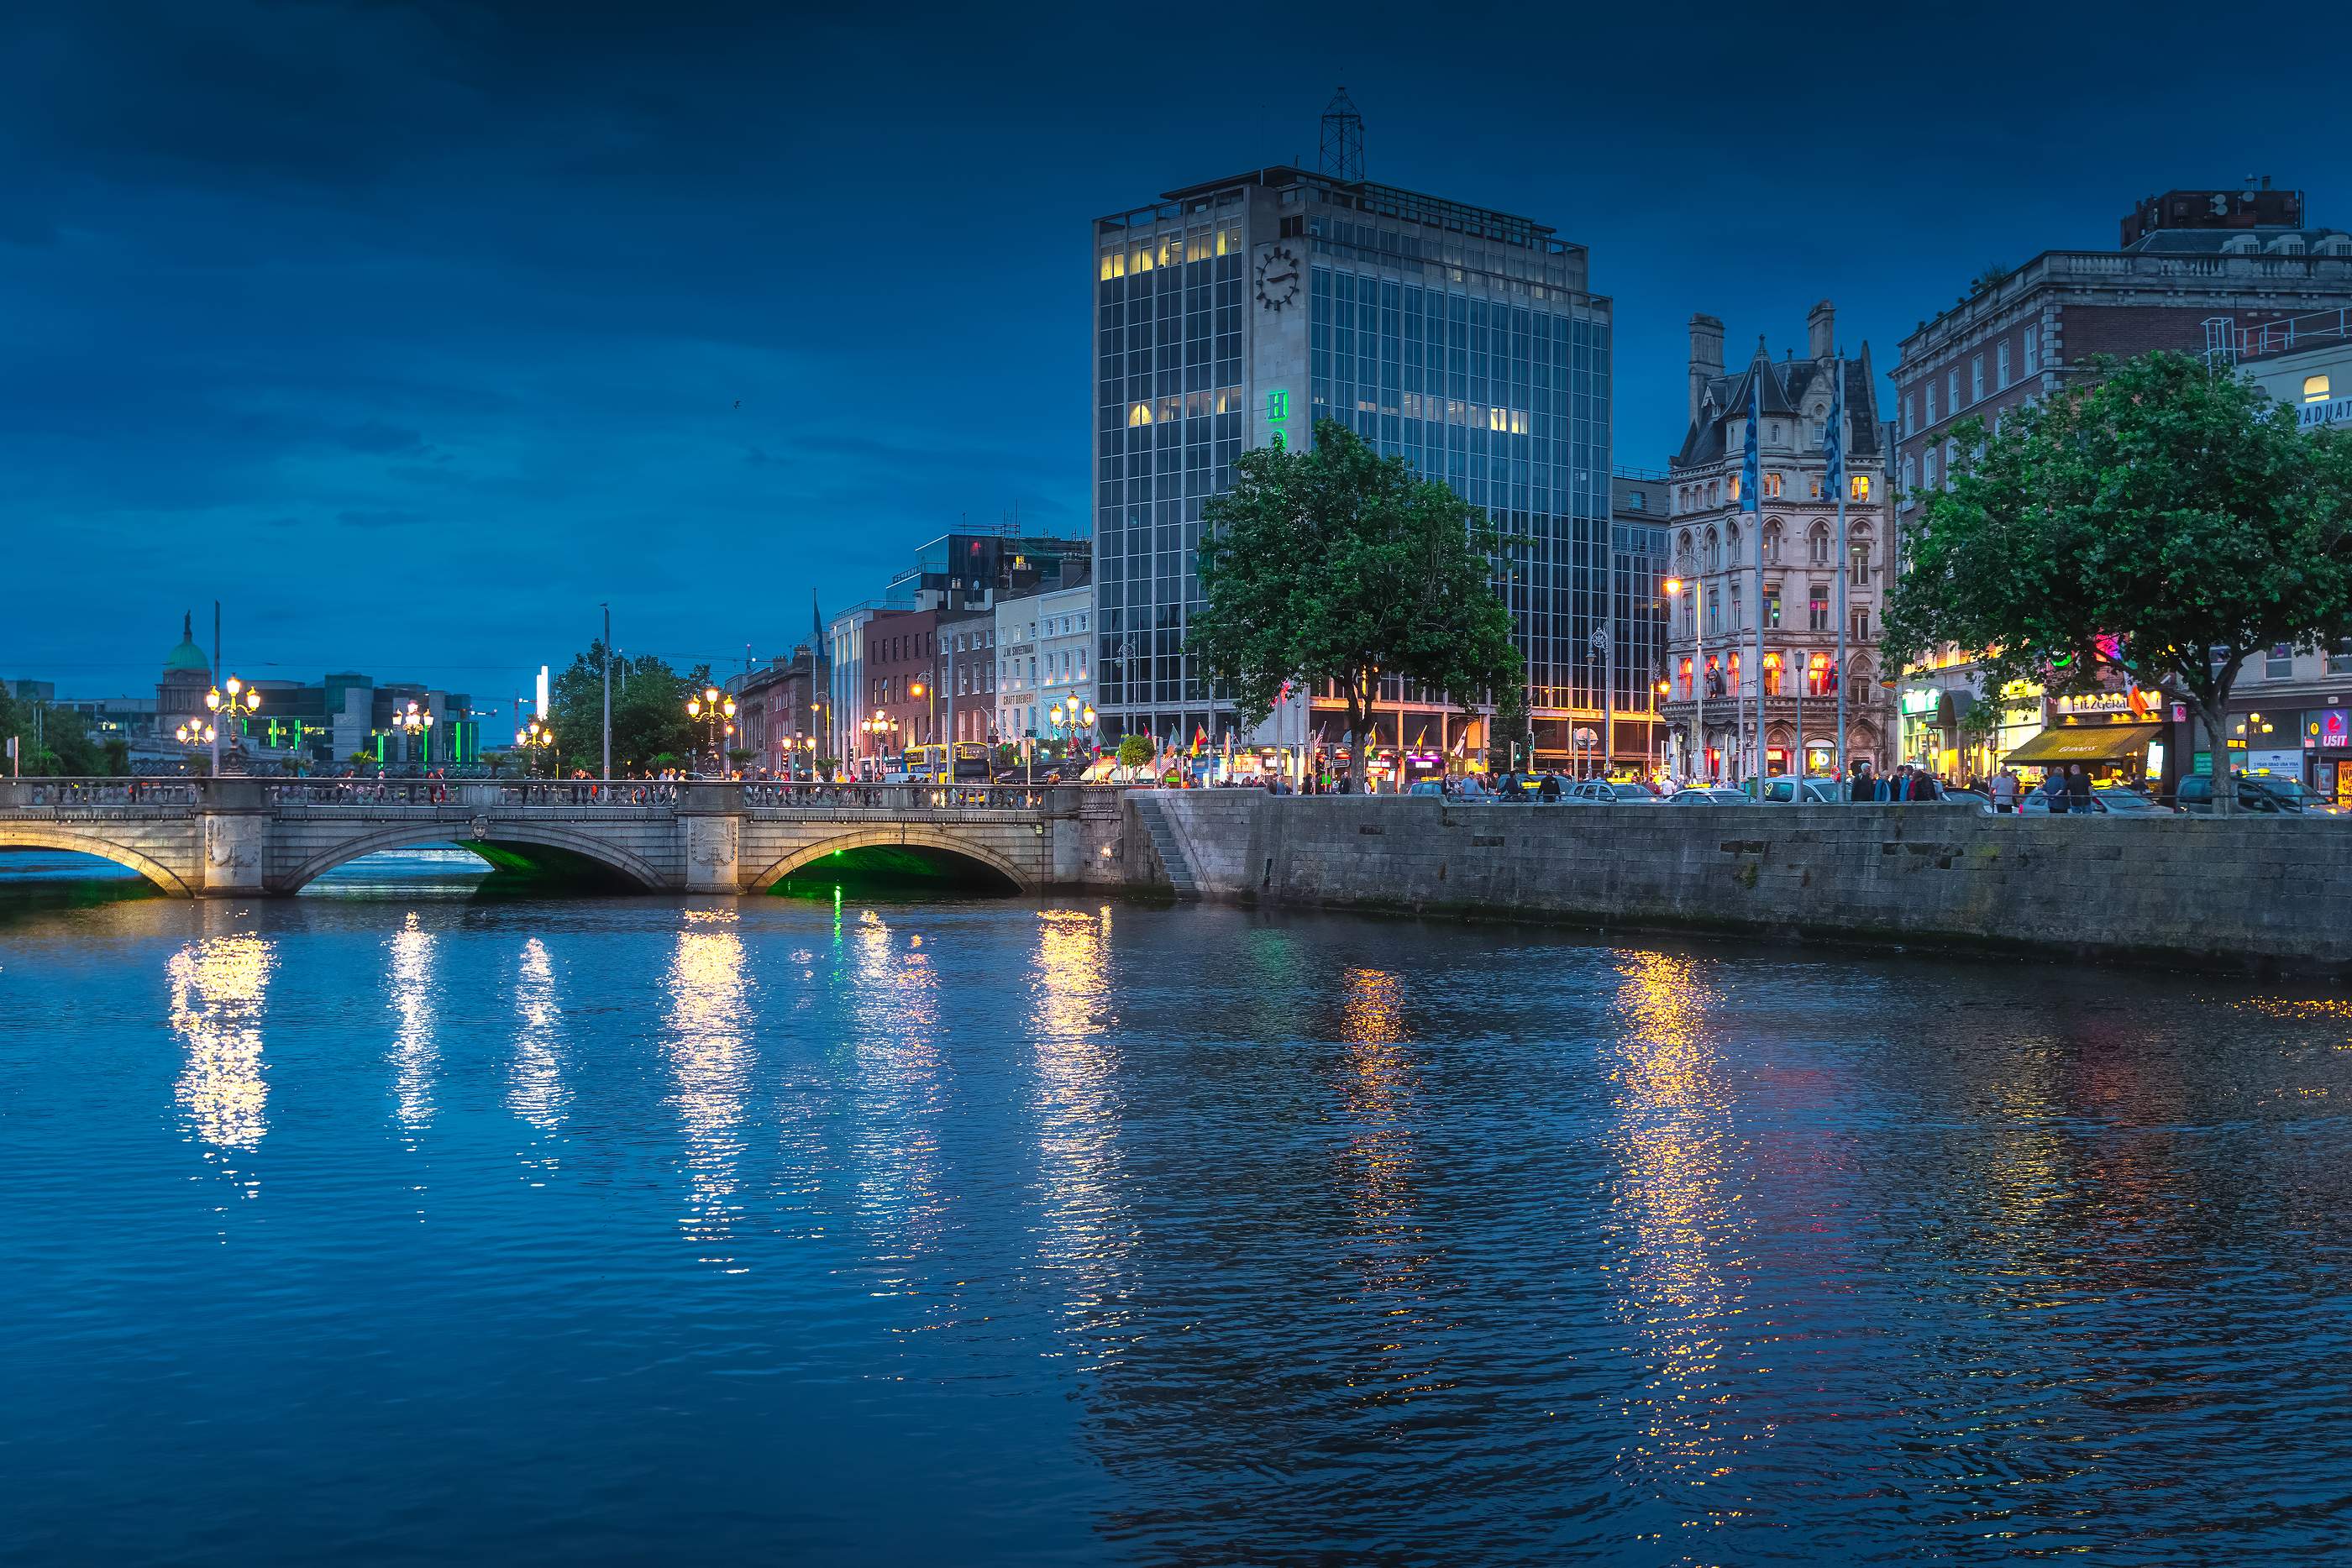 O'Connell Street and Bridge